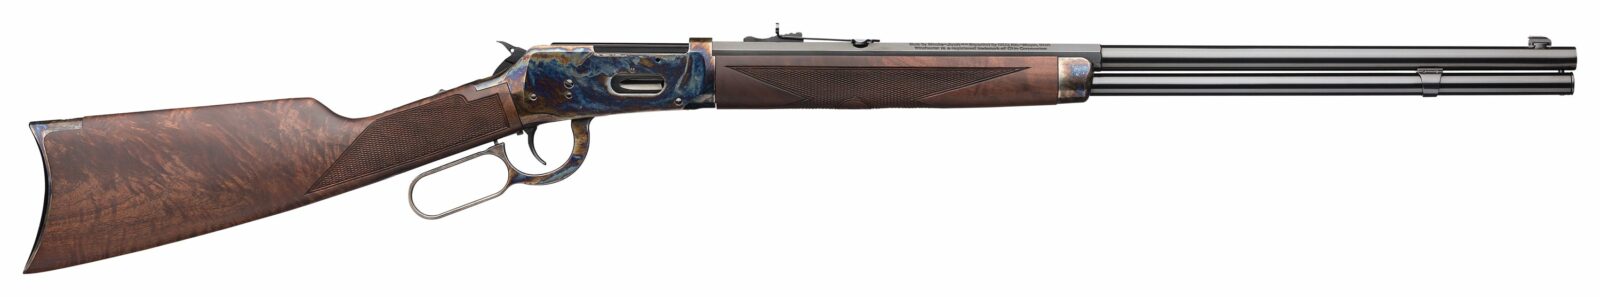 Winchester M1894 Deluxe Sporting lever action rifle